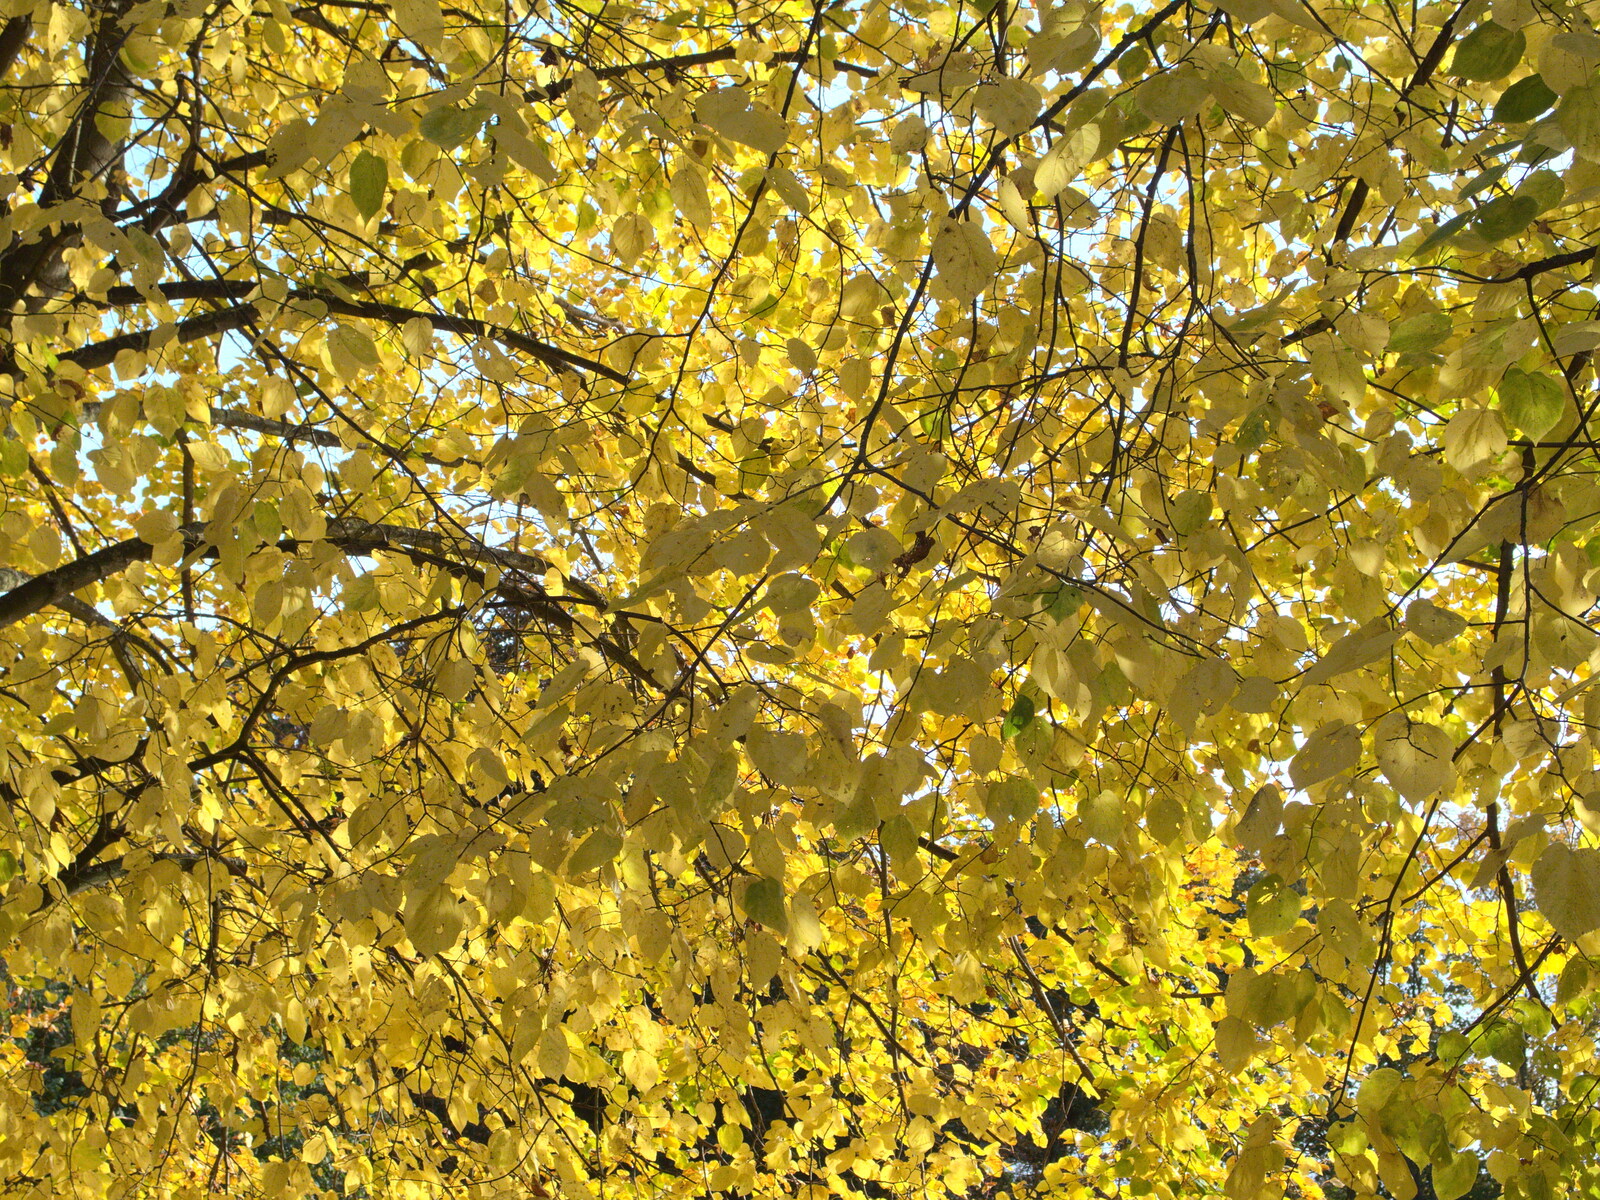 Golden autumn leaves from Apple Picking and The BBs at Framingham Earl, Norfolk - 25th October 2015